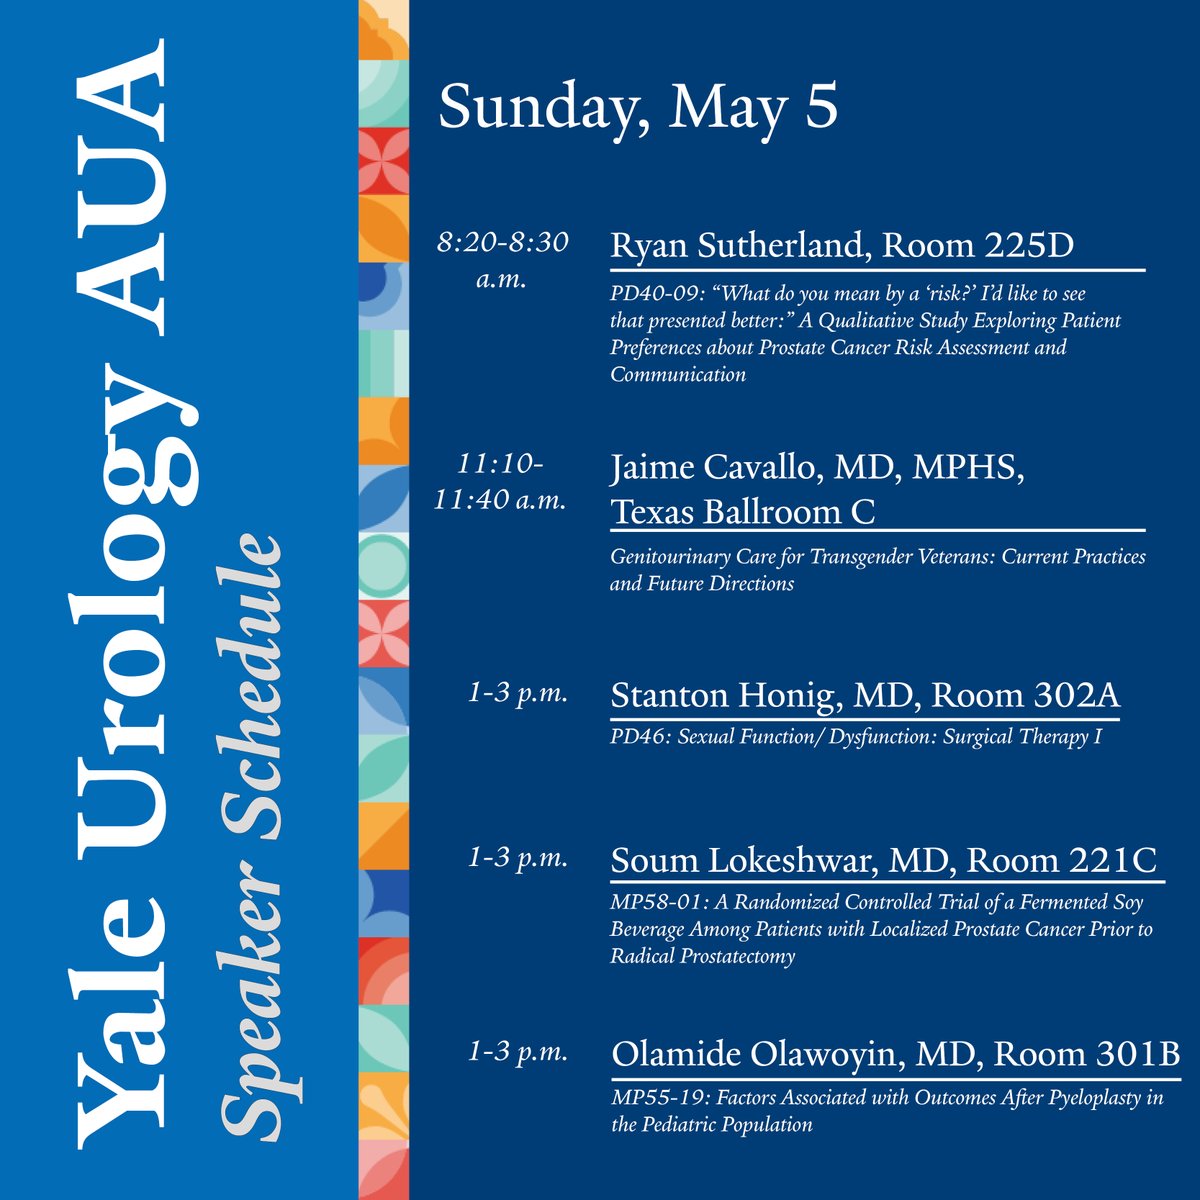 It's been a great #AUA24 for our faculty, residents, and research associates. They've been sharing their knowledge and learning from other urologists. Here's where, when, and what topics they'll be discussing. @YaleMed|@AmerUrological|@shonig|@SoumLokeshwar|@OlamideOlawo